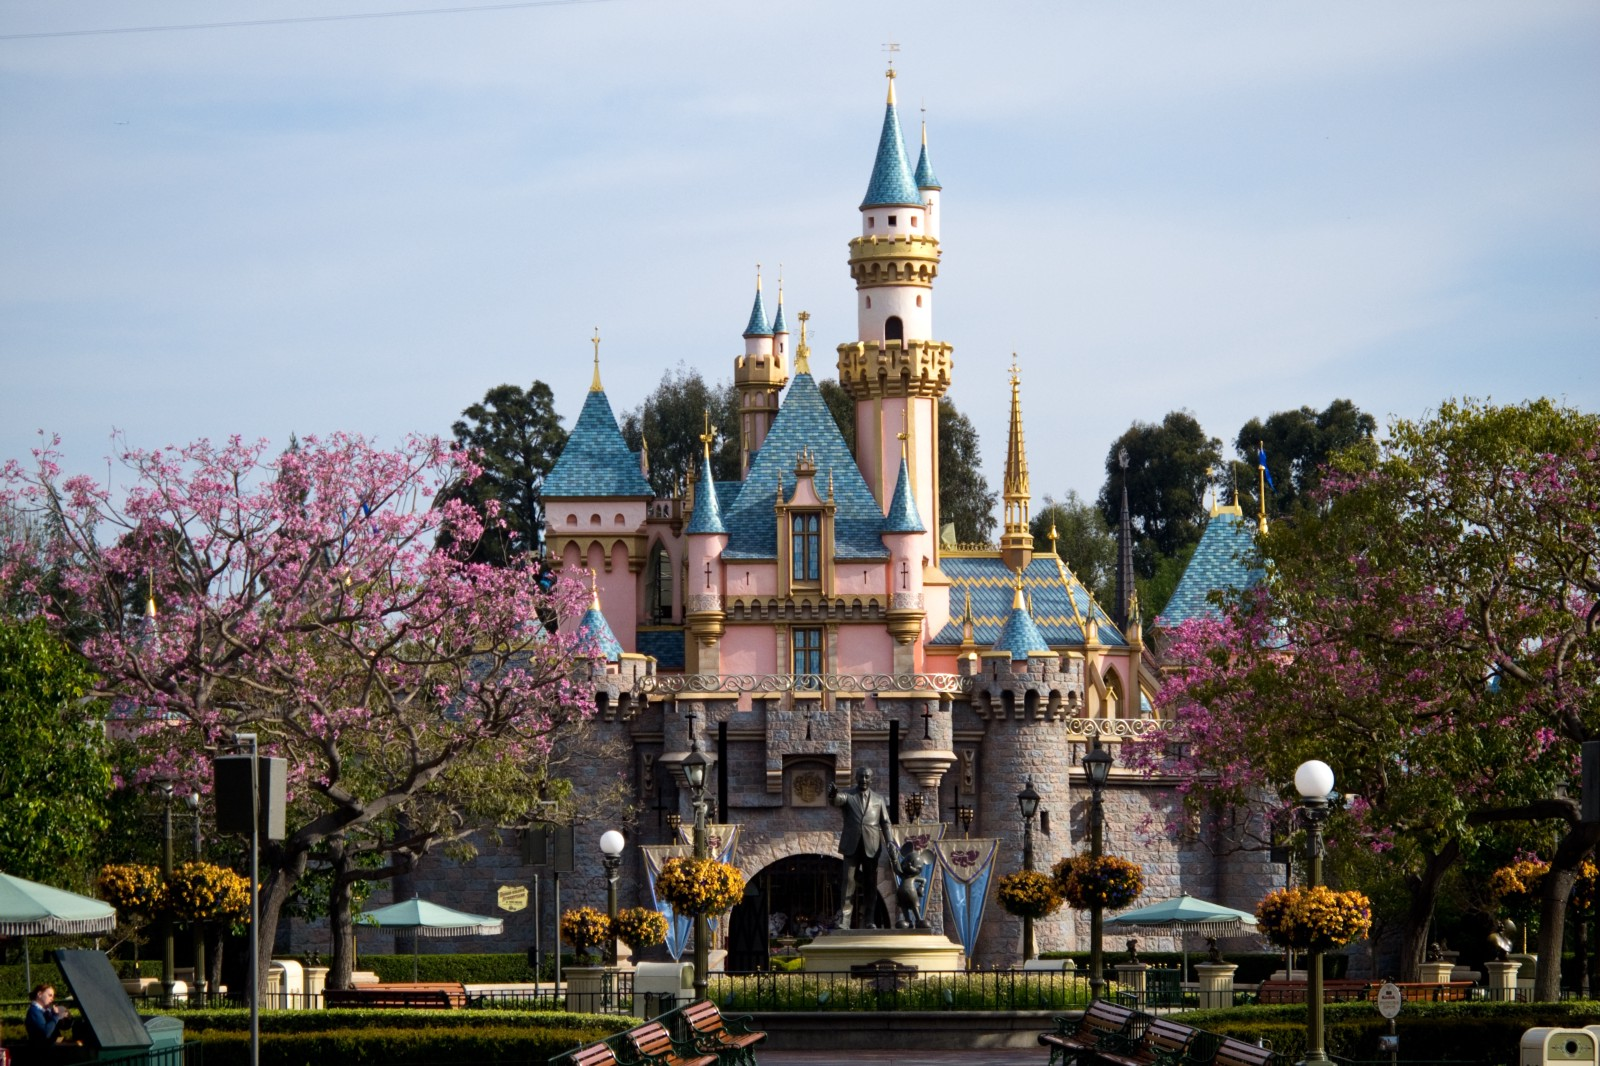 Disneyland Paris: 5 secrets you've always wanted to know about the